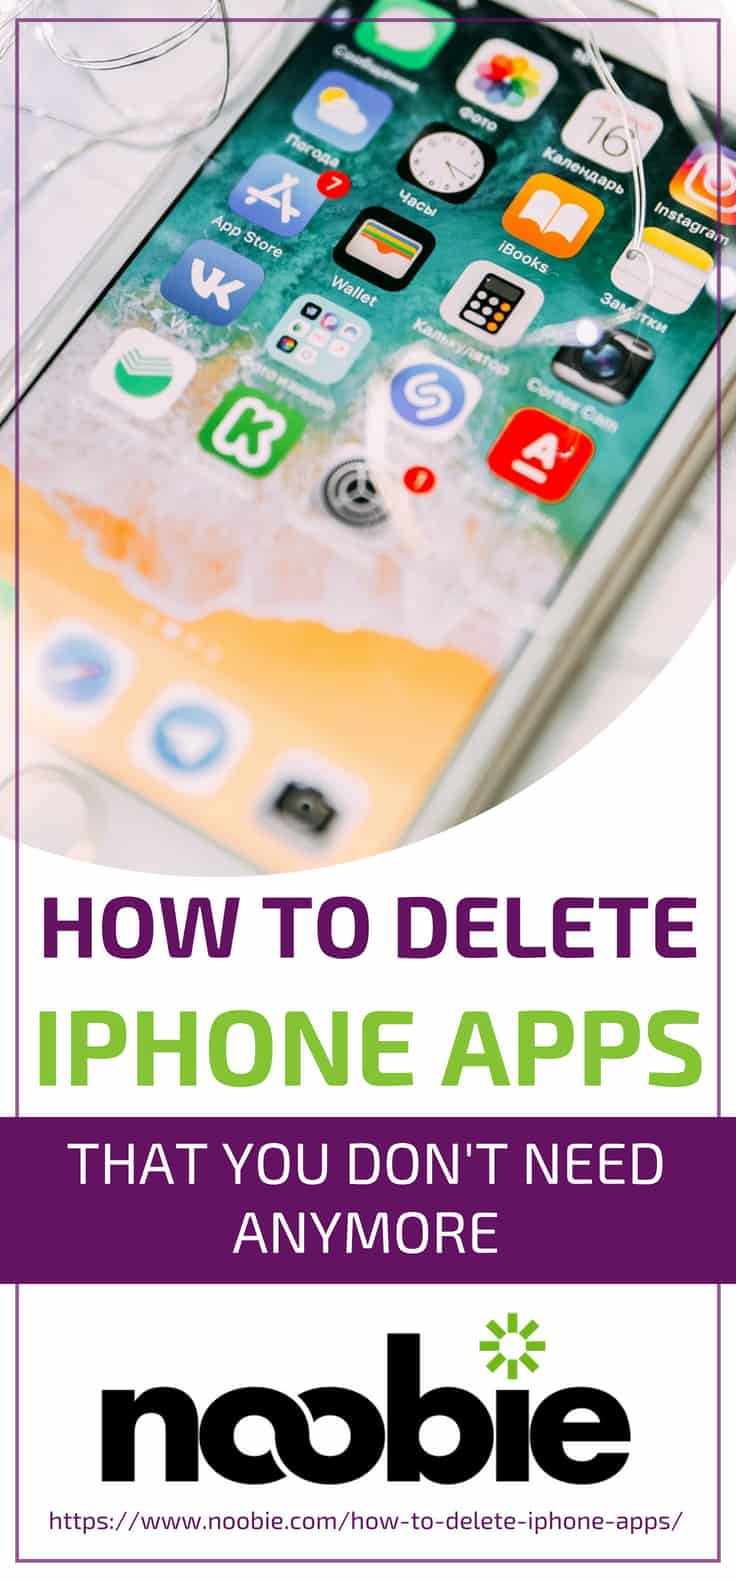 How To Delete Iphone Apps That You Don't Need Anymore | how to permanently delete apps from iPhone | how to delete apps on iPhone permanently | https://noobie.com/how-to-delete-iphone-apps/